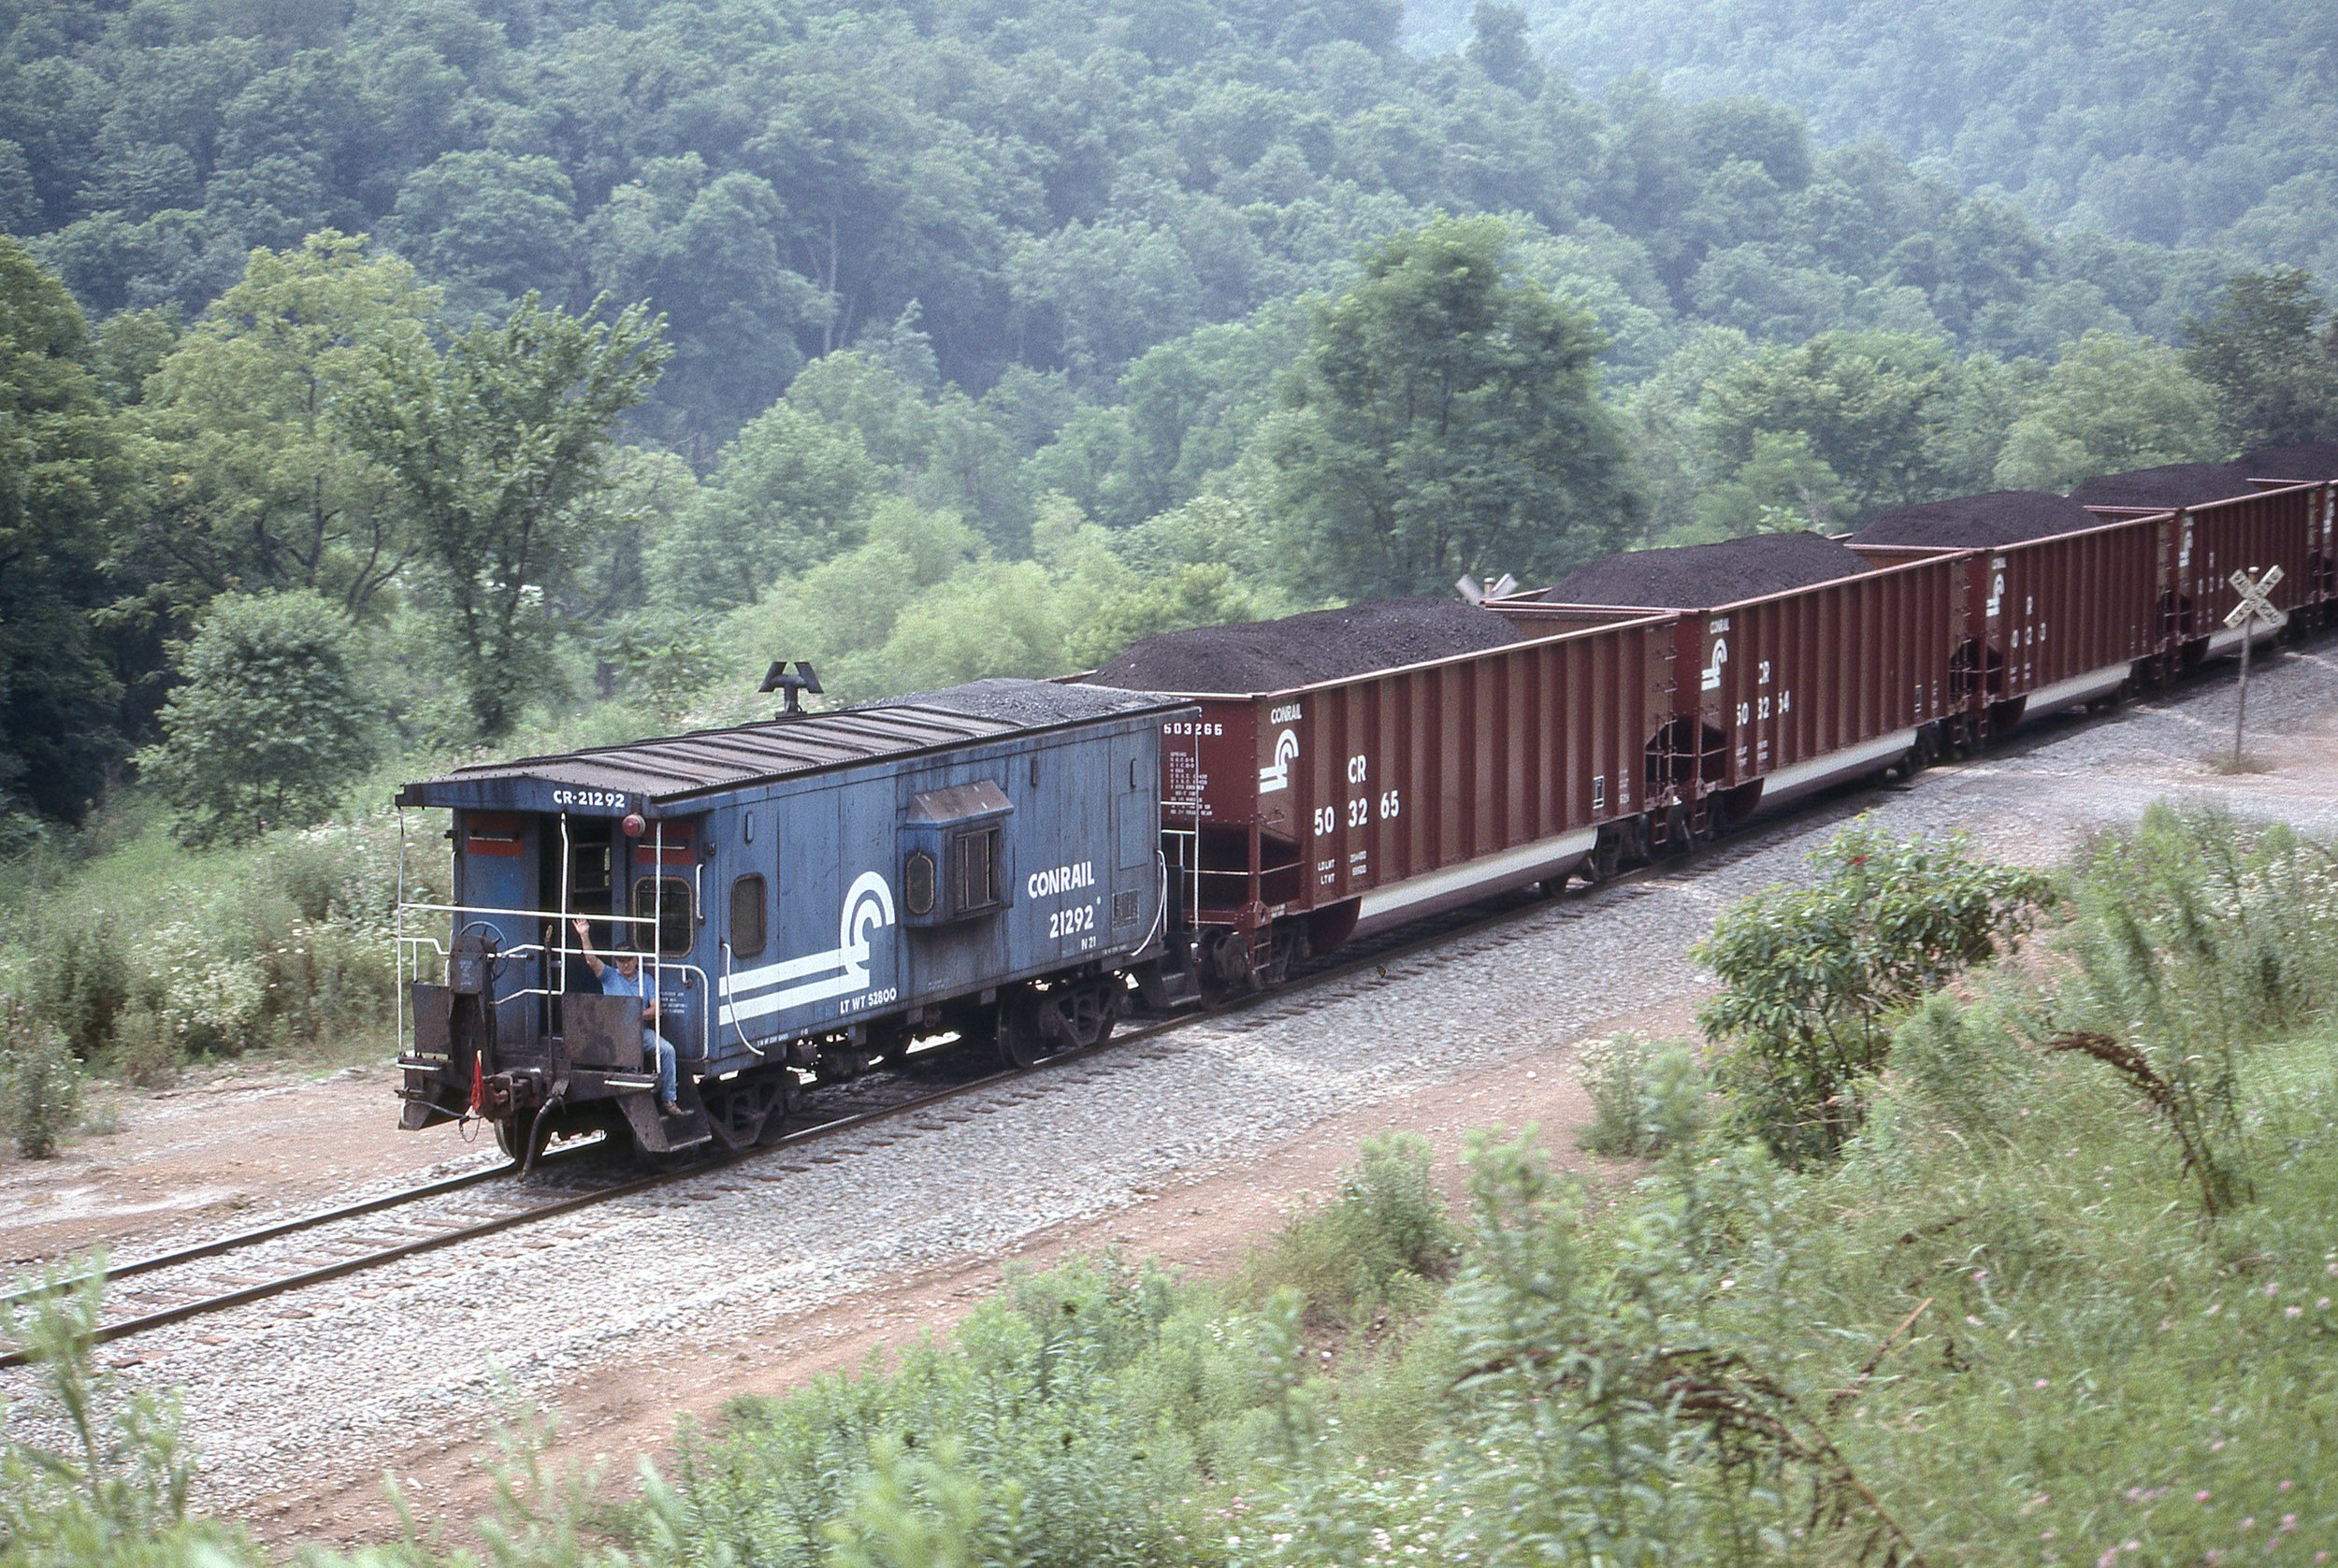   July 21, 1990 in Holbrook, PA - The Garbely Publishing Company collection  